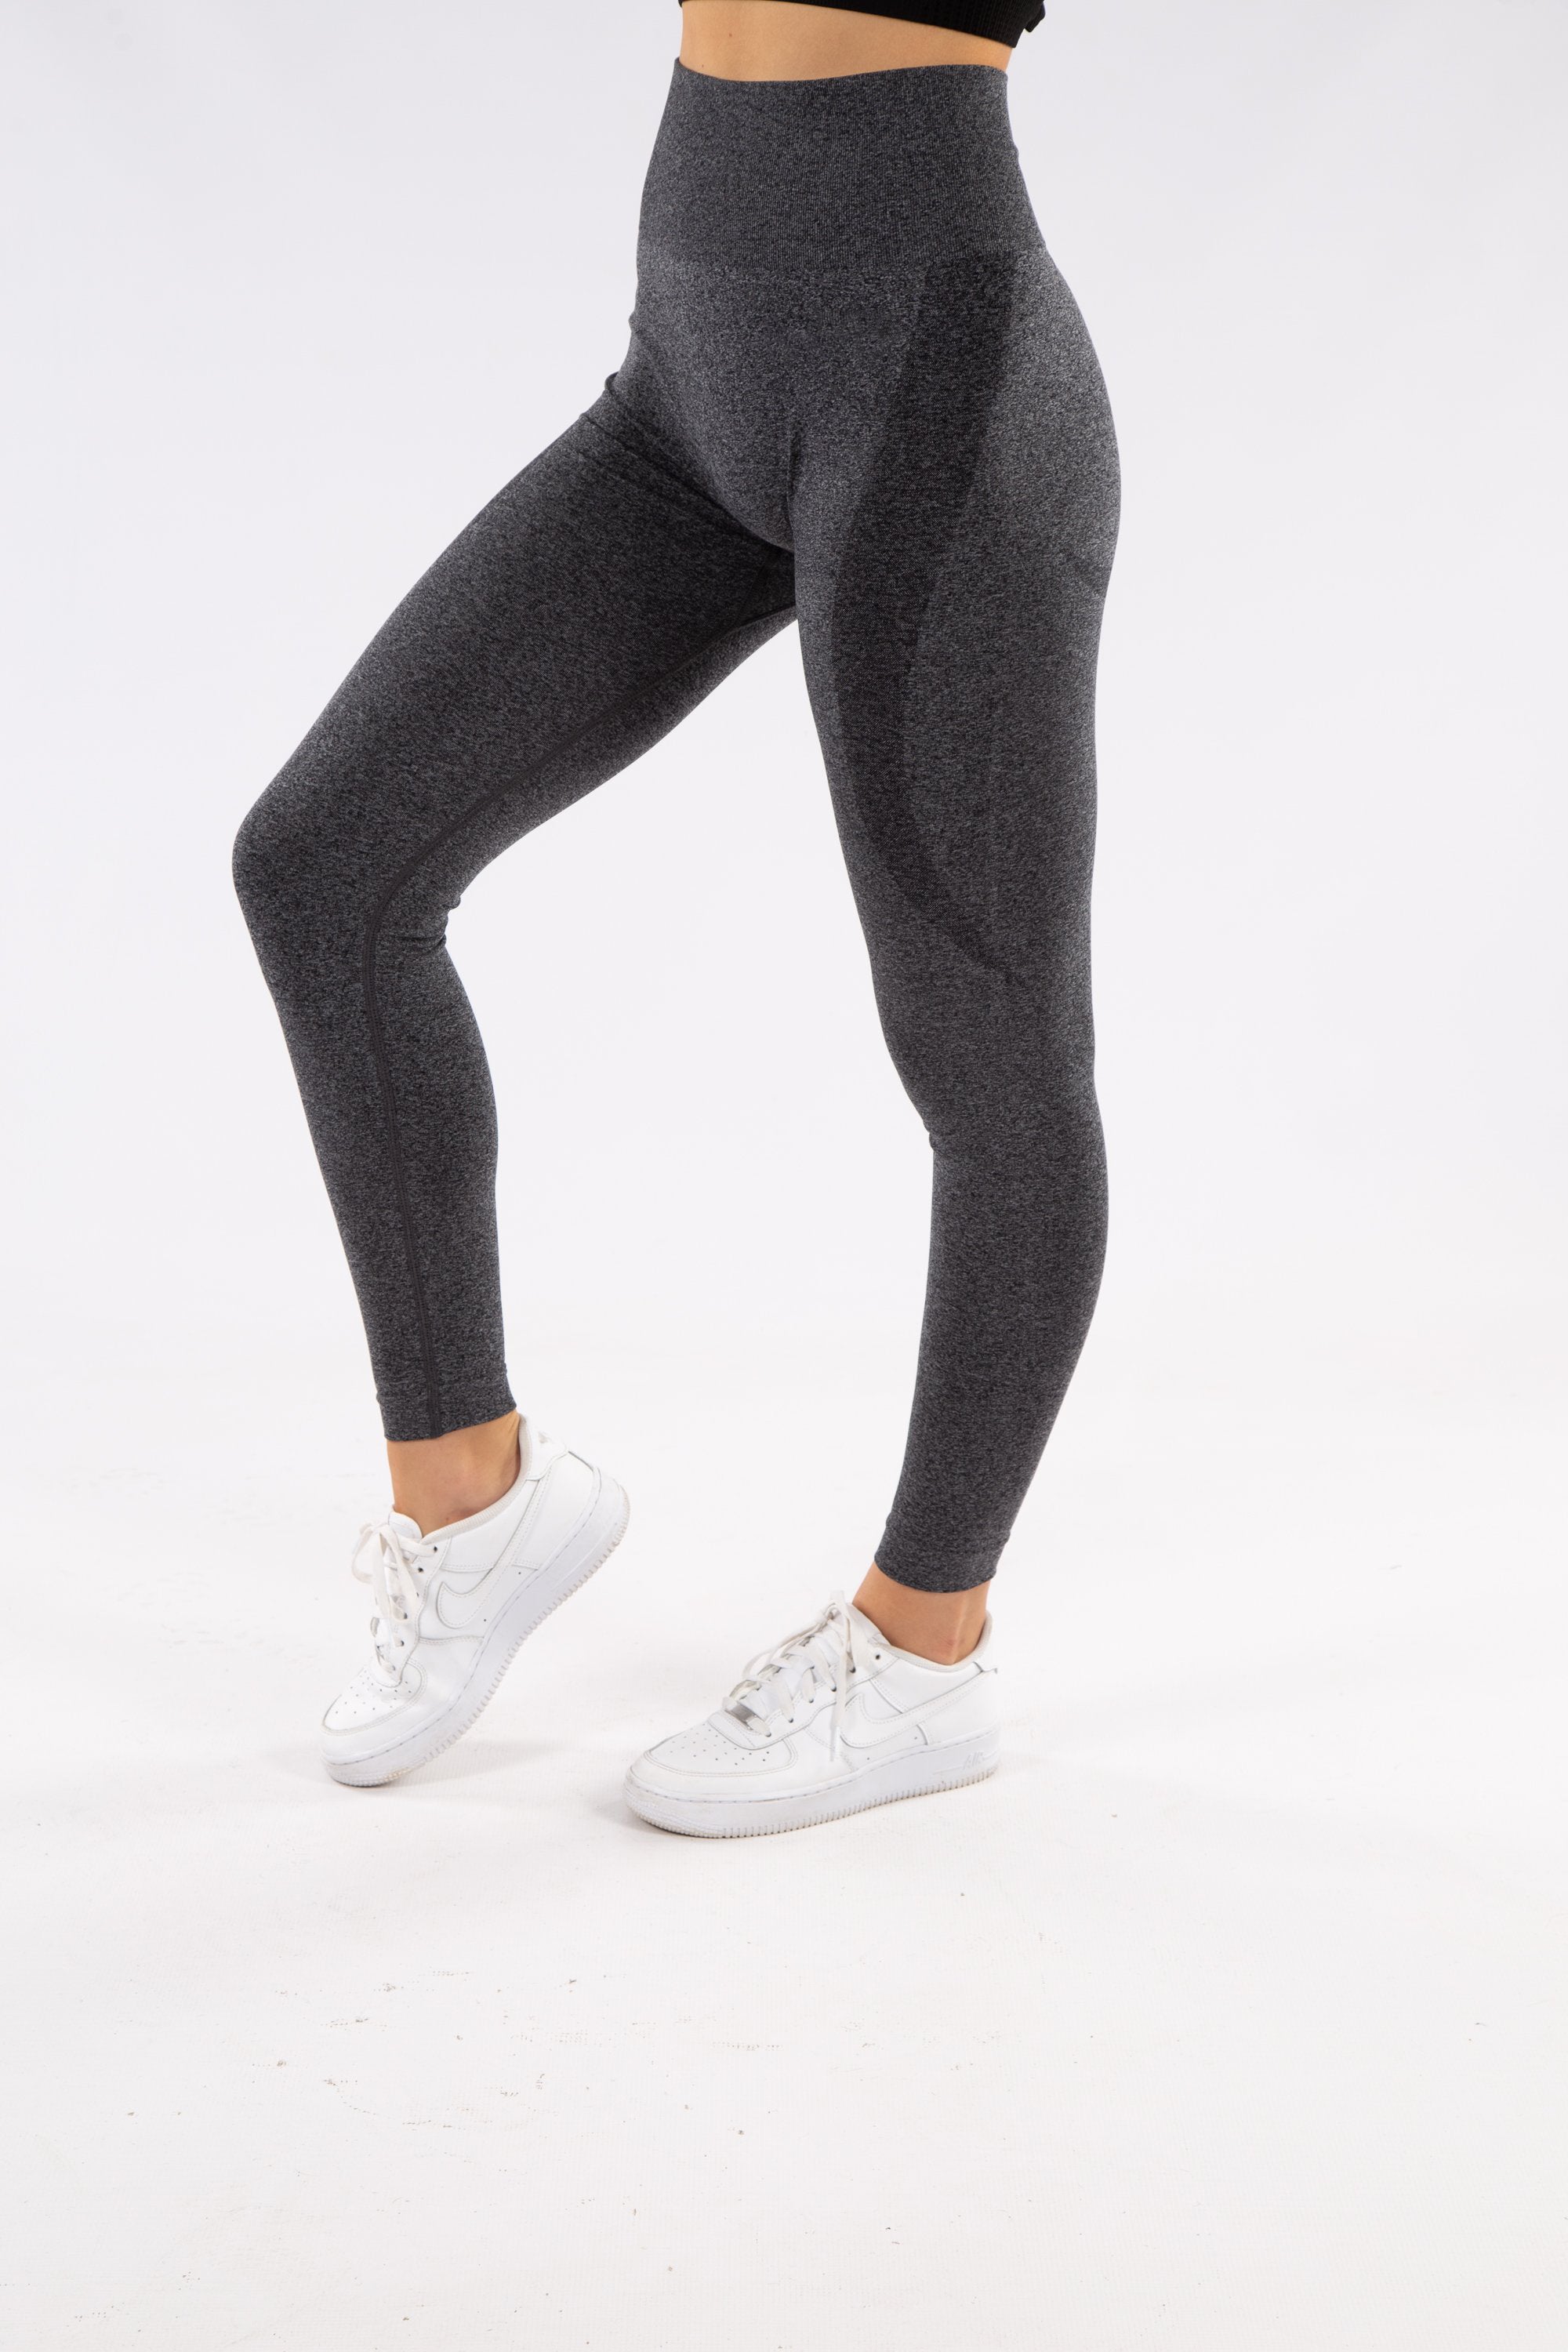 Gymbunny Seamless scrunch leggings have contour shadowing designed to  enhance the beauty of your natural curves. – Wonderfit Australia